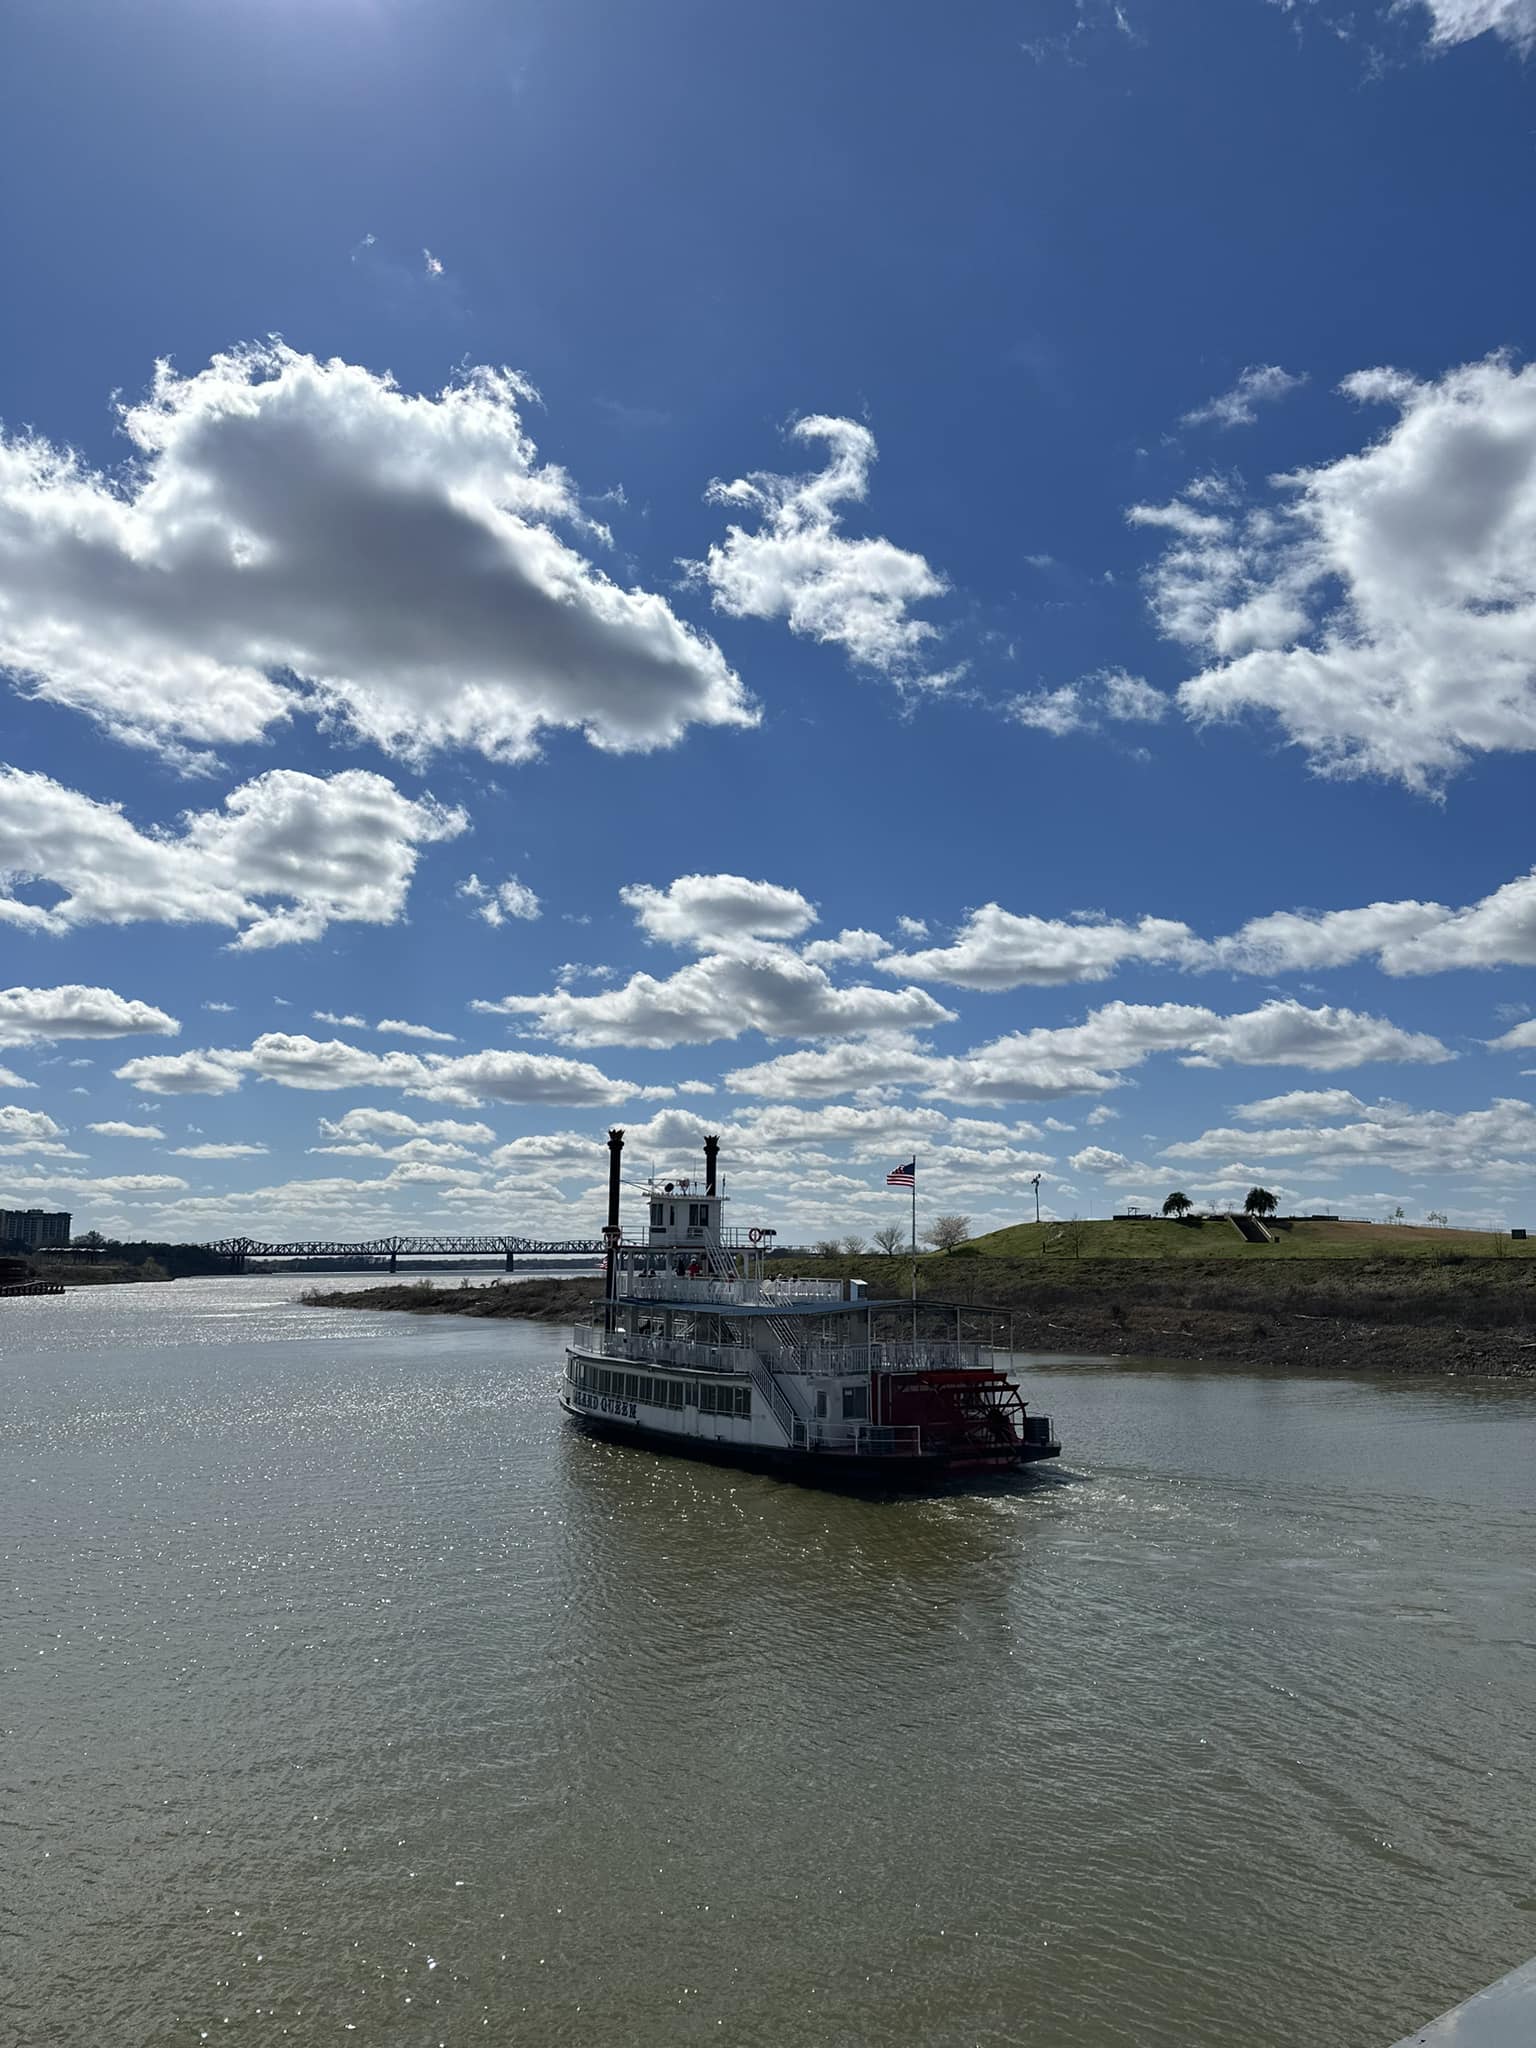 A paddle steamer on the Memphis river under a partly cloudy sky, with a bridge in the background and green riverbanks.